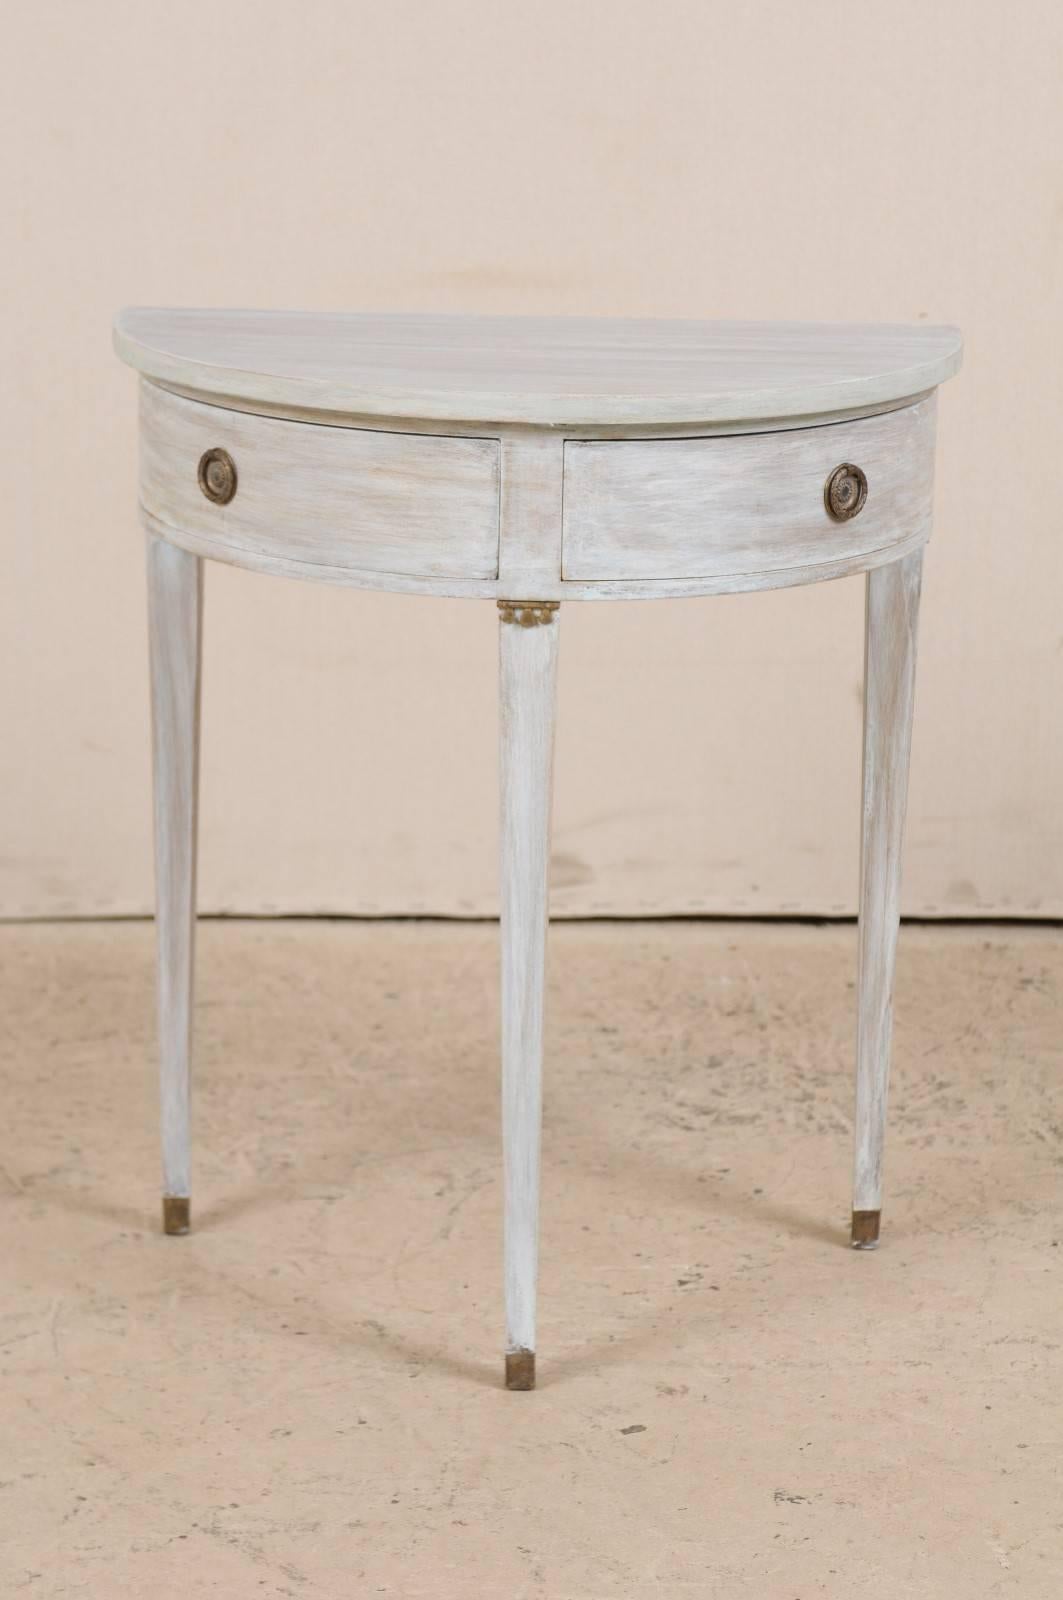 Scandinavian Modern Swedish Pale Blue Painted Demilune Table with Two Drawers & Three Tapered Legs